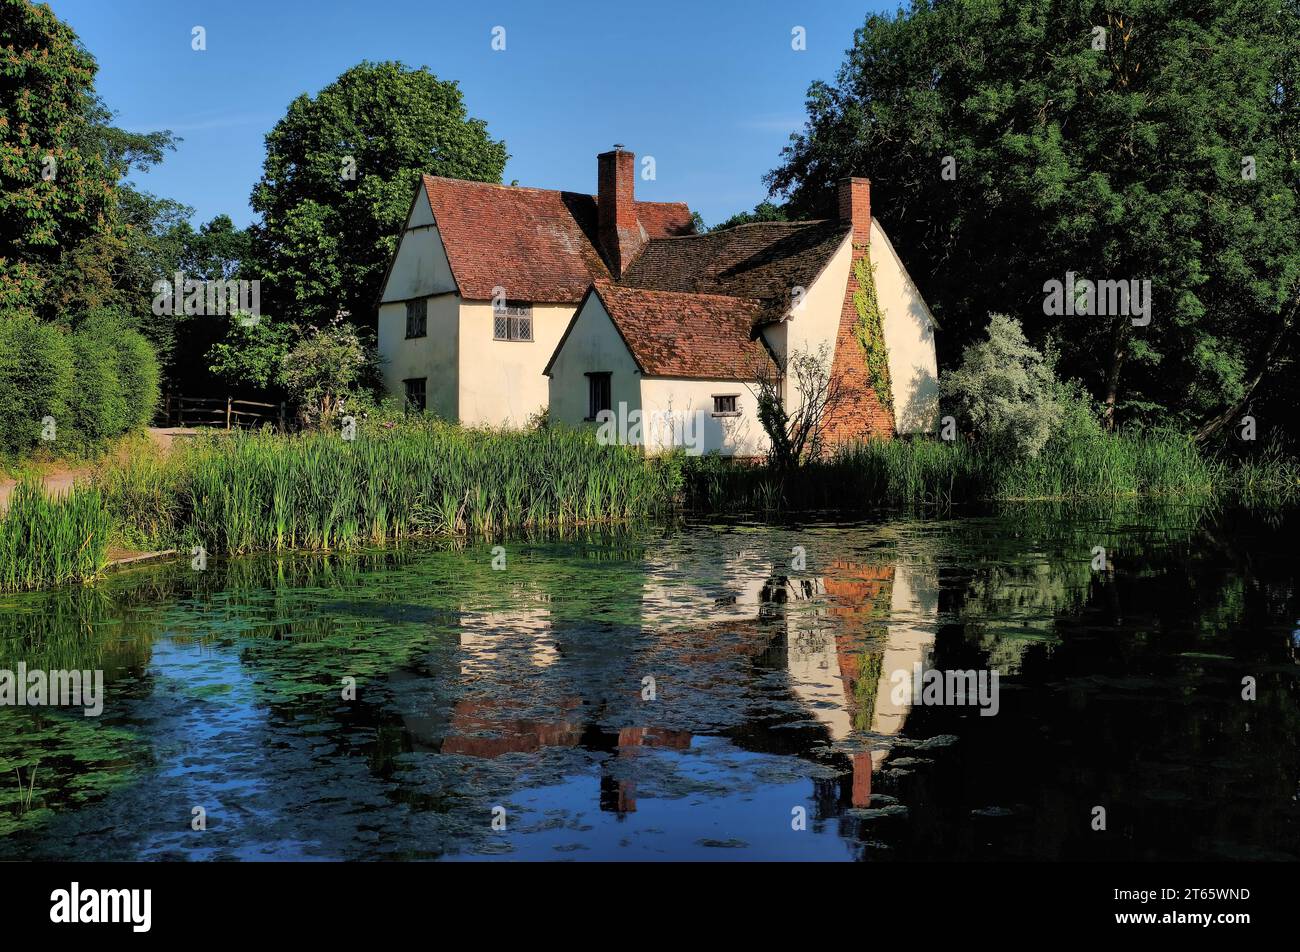 Willy Lott's House (in Hay Wain) with reflections in River Stour, Flatford village, John Constable Country, Dedham Vale, Suffolk, England, UK Stock Photo